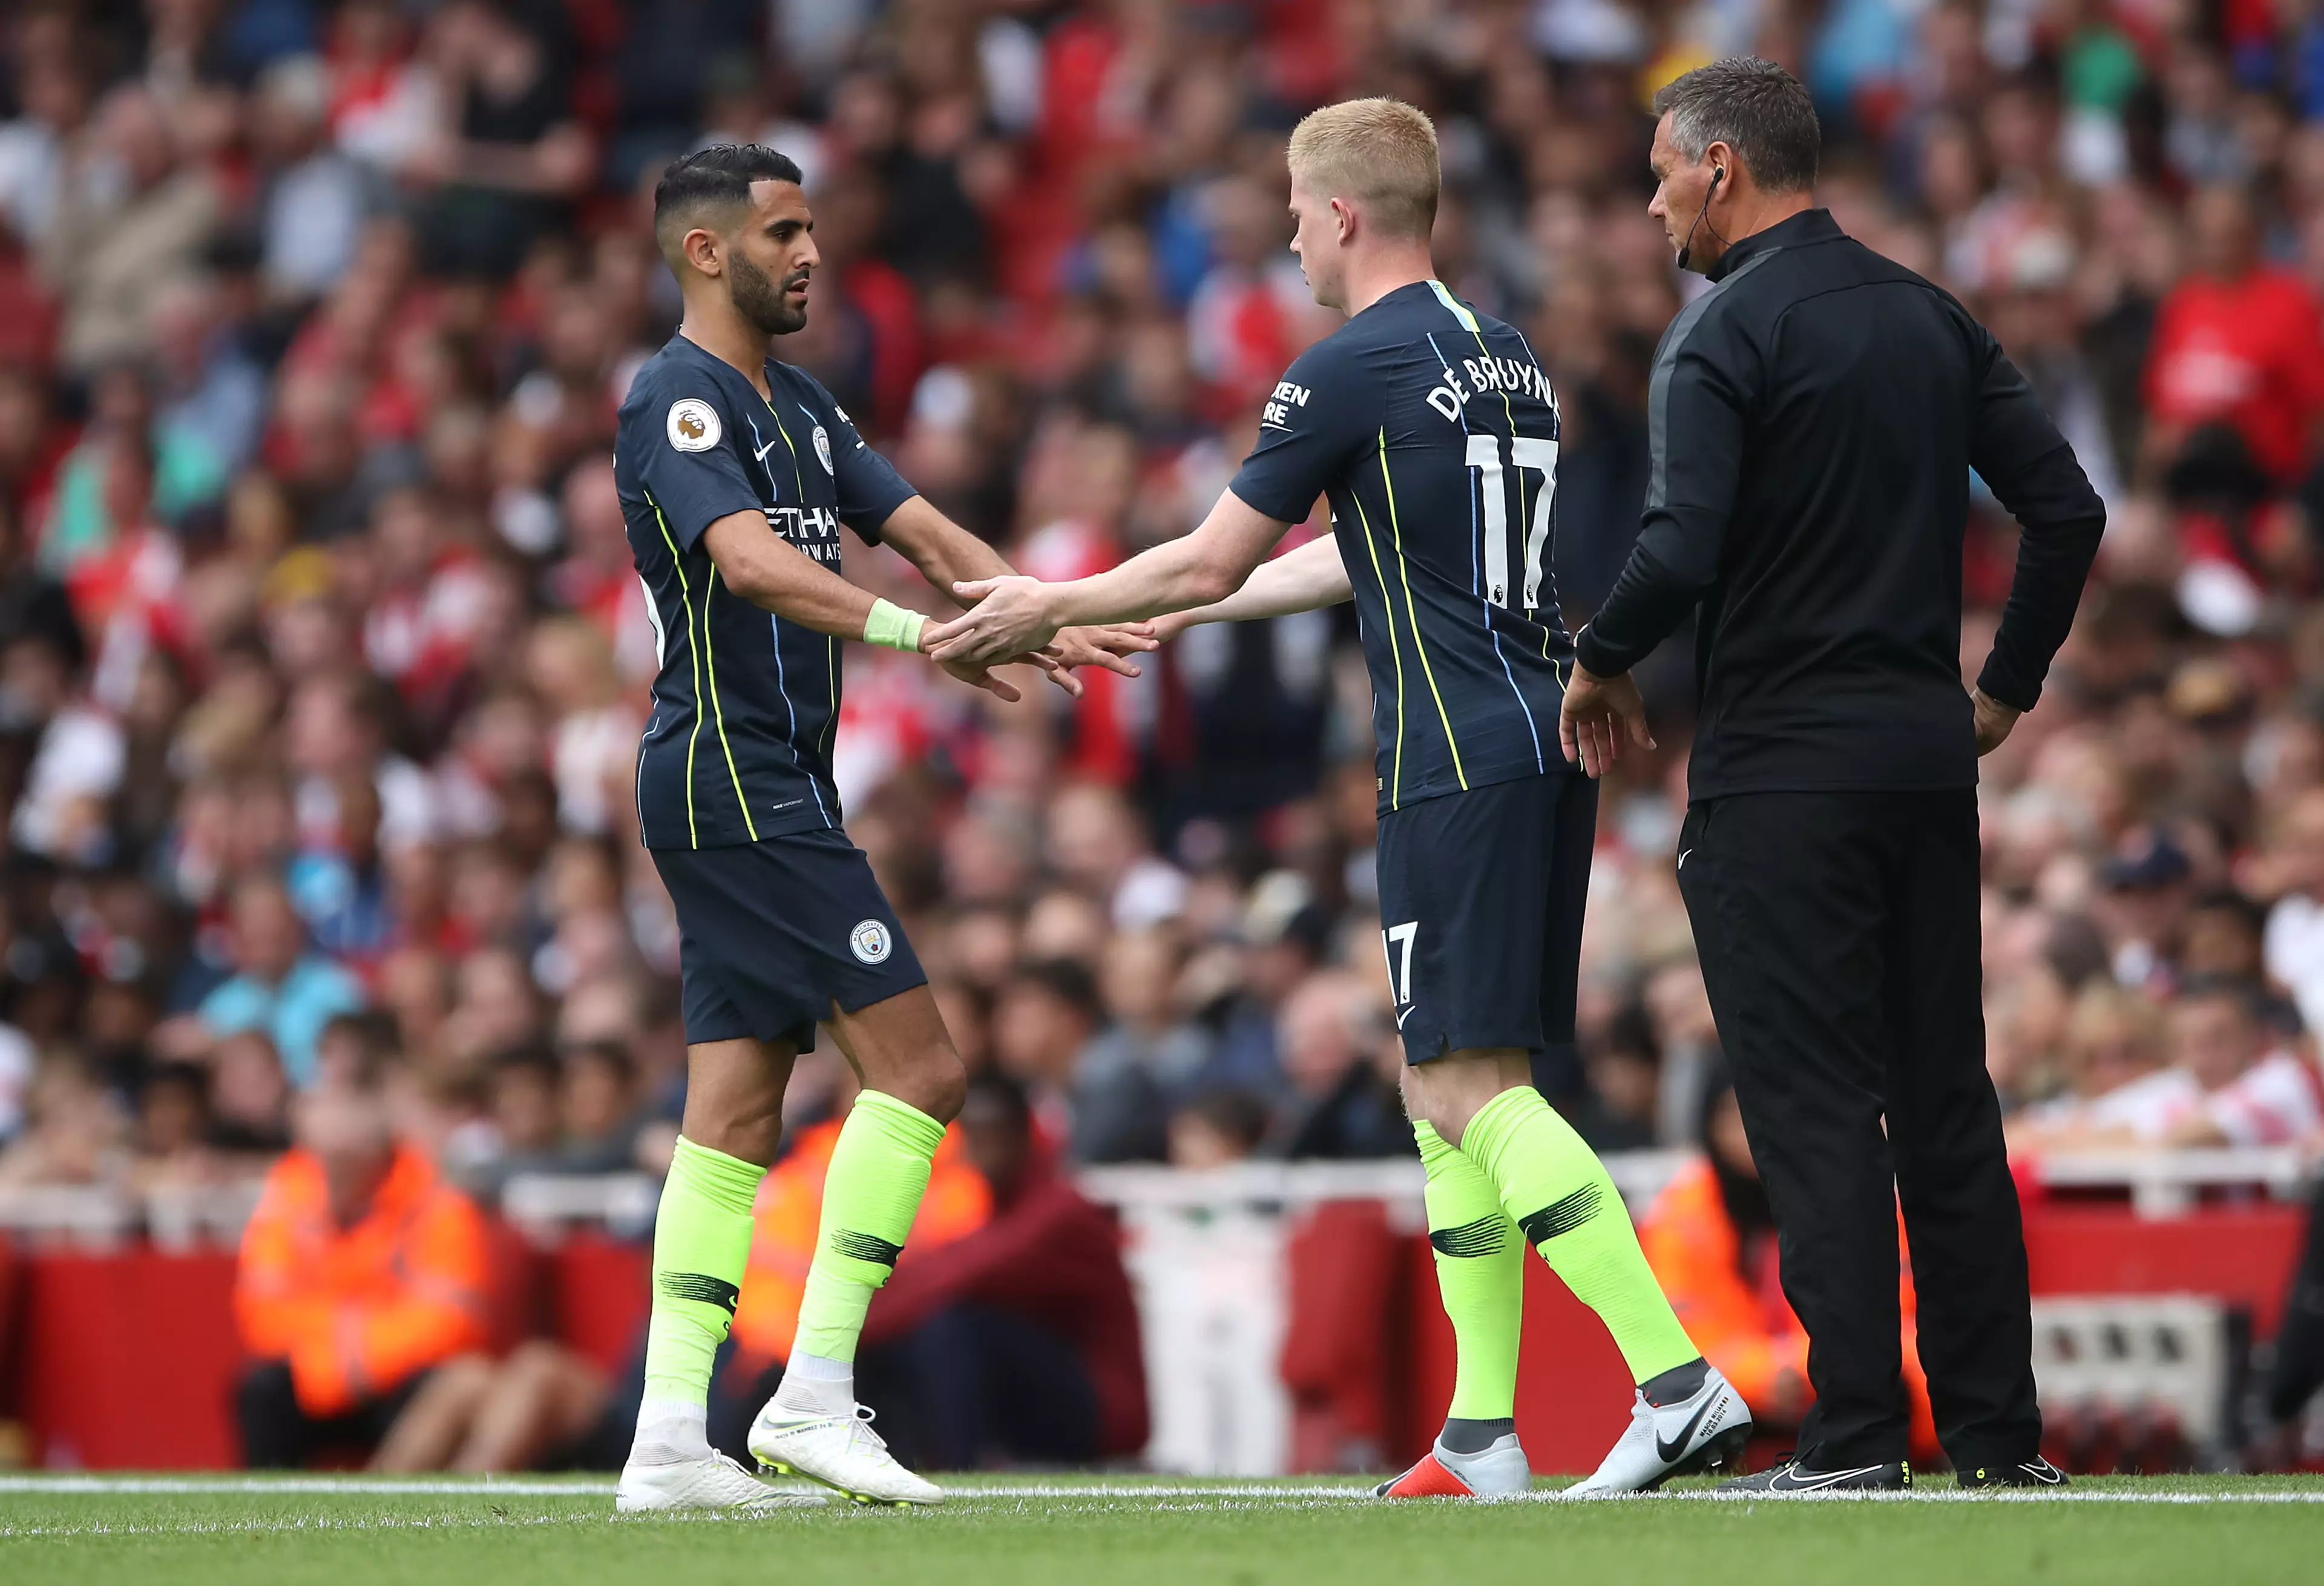 De Bruyne makes his first appearance of the new season as a sub. Image: PA